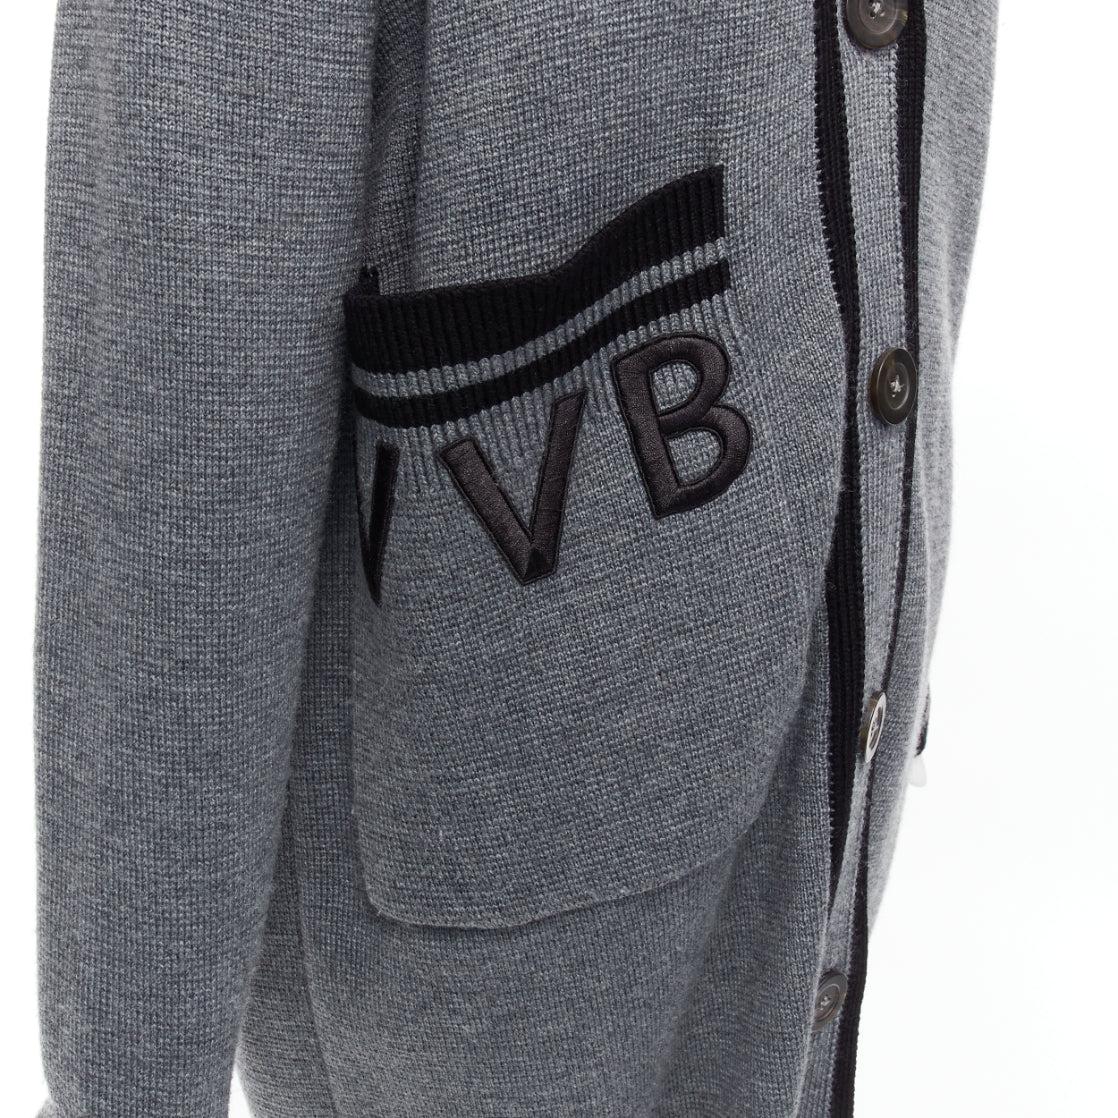 VVB VICTORIA BECKHAM 2017 Runway grey wool logo oversized cardigan UK2 XXS
Reference: DYTG/A00051
Brand: VVB Victoria Beckham
Designer: Victoria Beckham
Material: Wool
Color: Black, Grey
Pattern: Solid
Closure: Button
Extra Details: VVB logo at